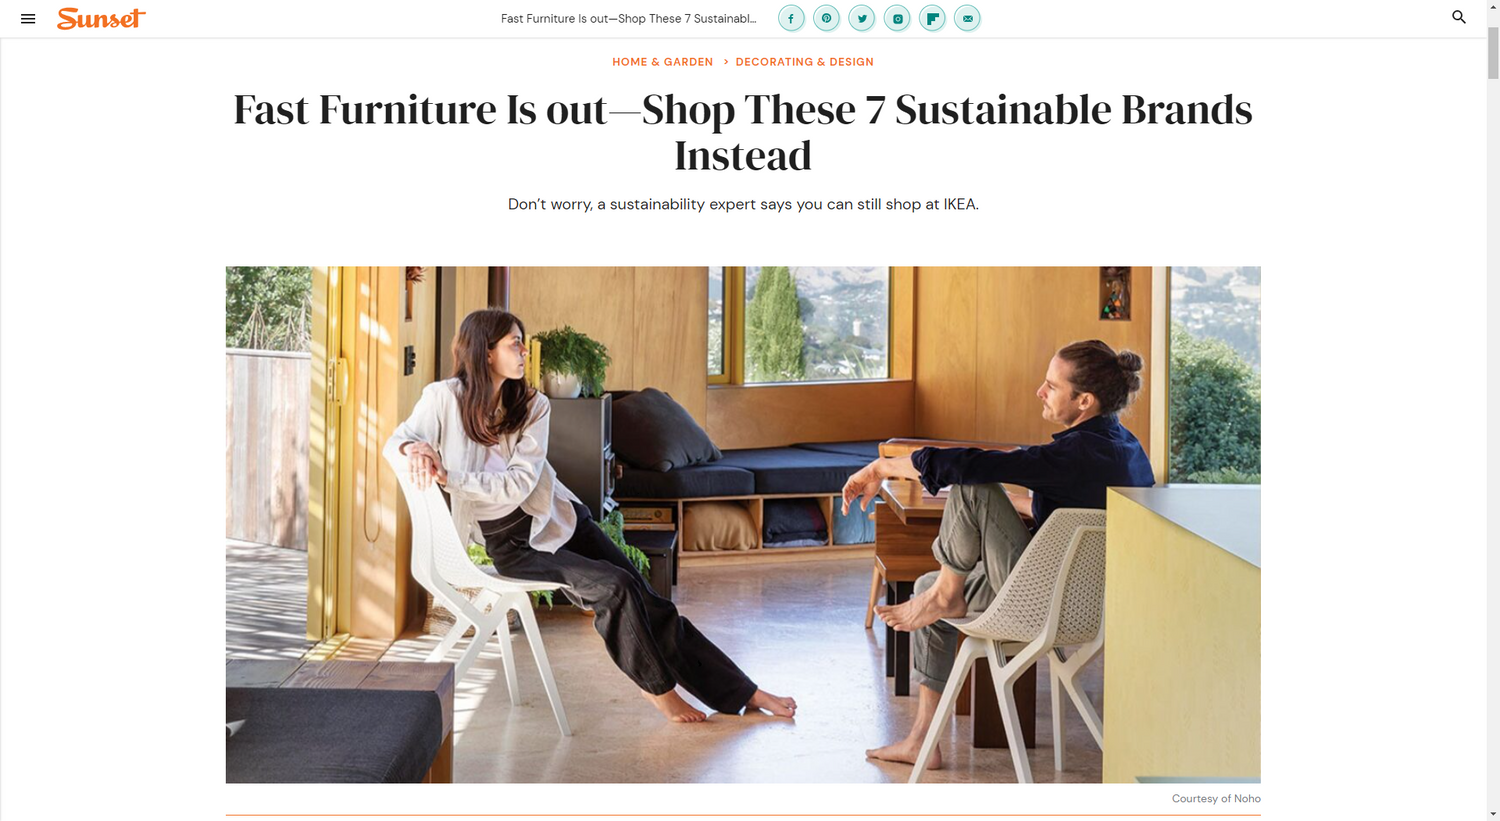 Hoek: A Sustainable Choice Featured in Sunset Magazine